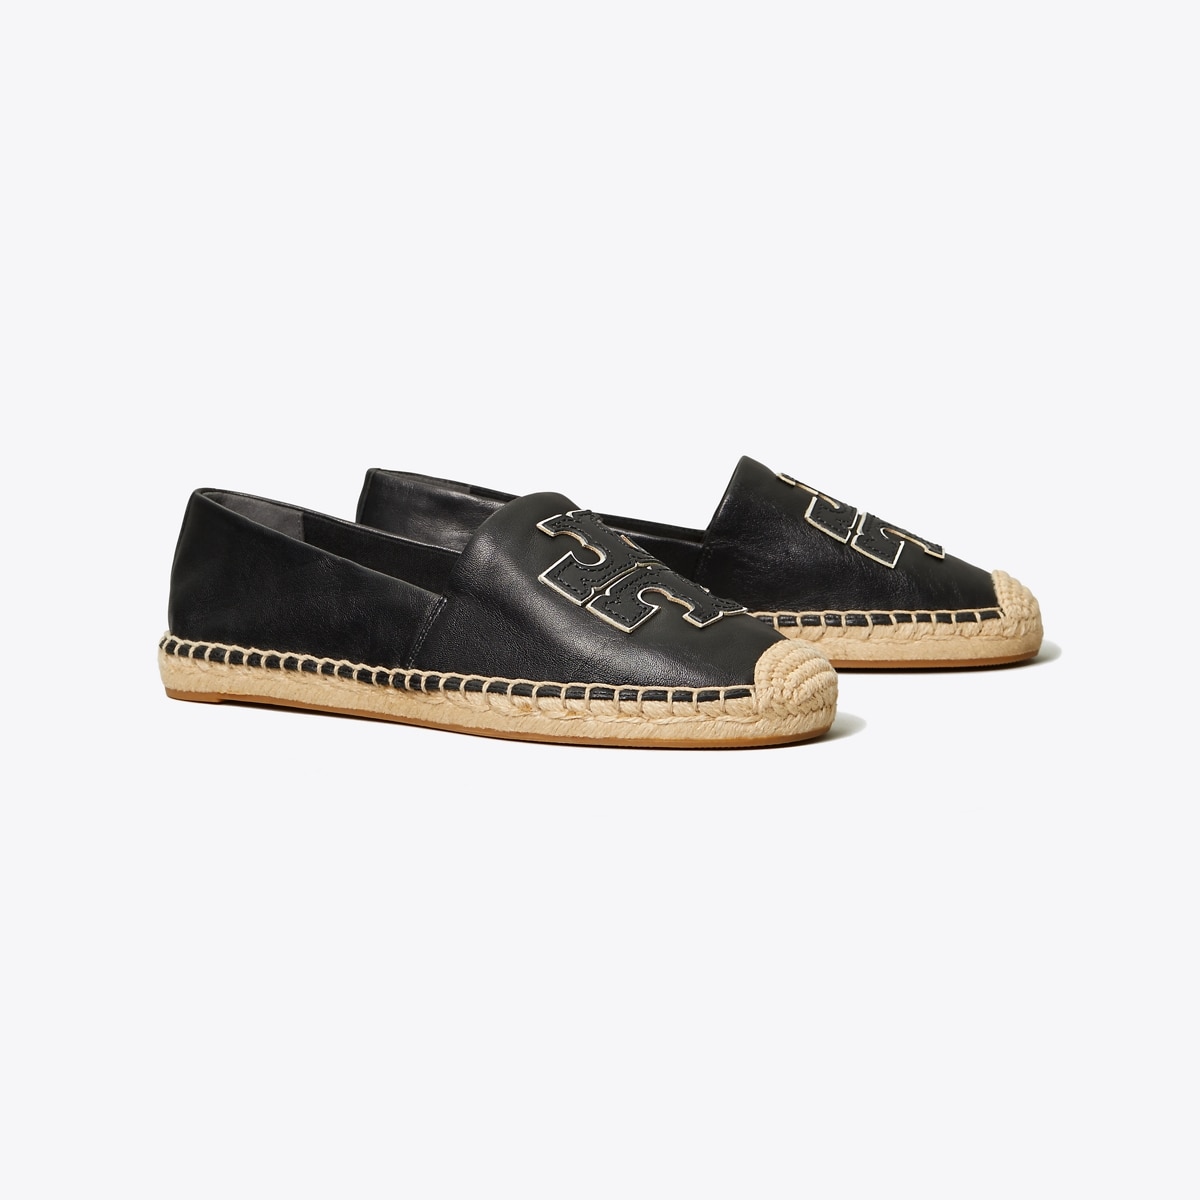 Tory Burch Ines Leather Espadrillas in Brown Womens Shoes Flats and flat shoes Espadrille shoes and sandals 